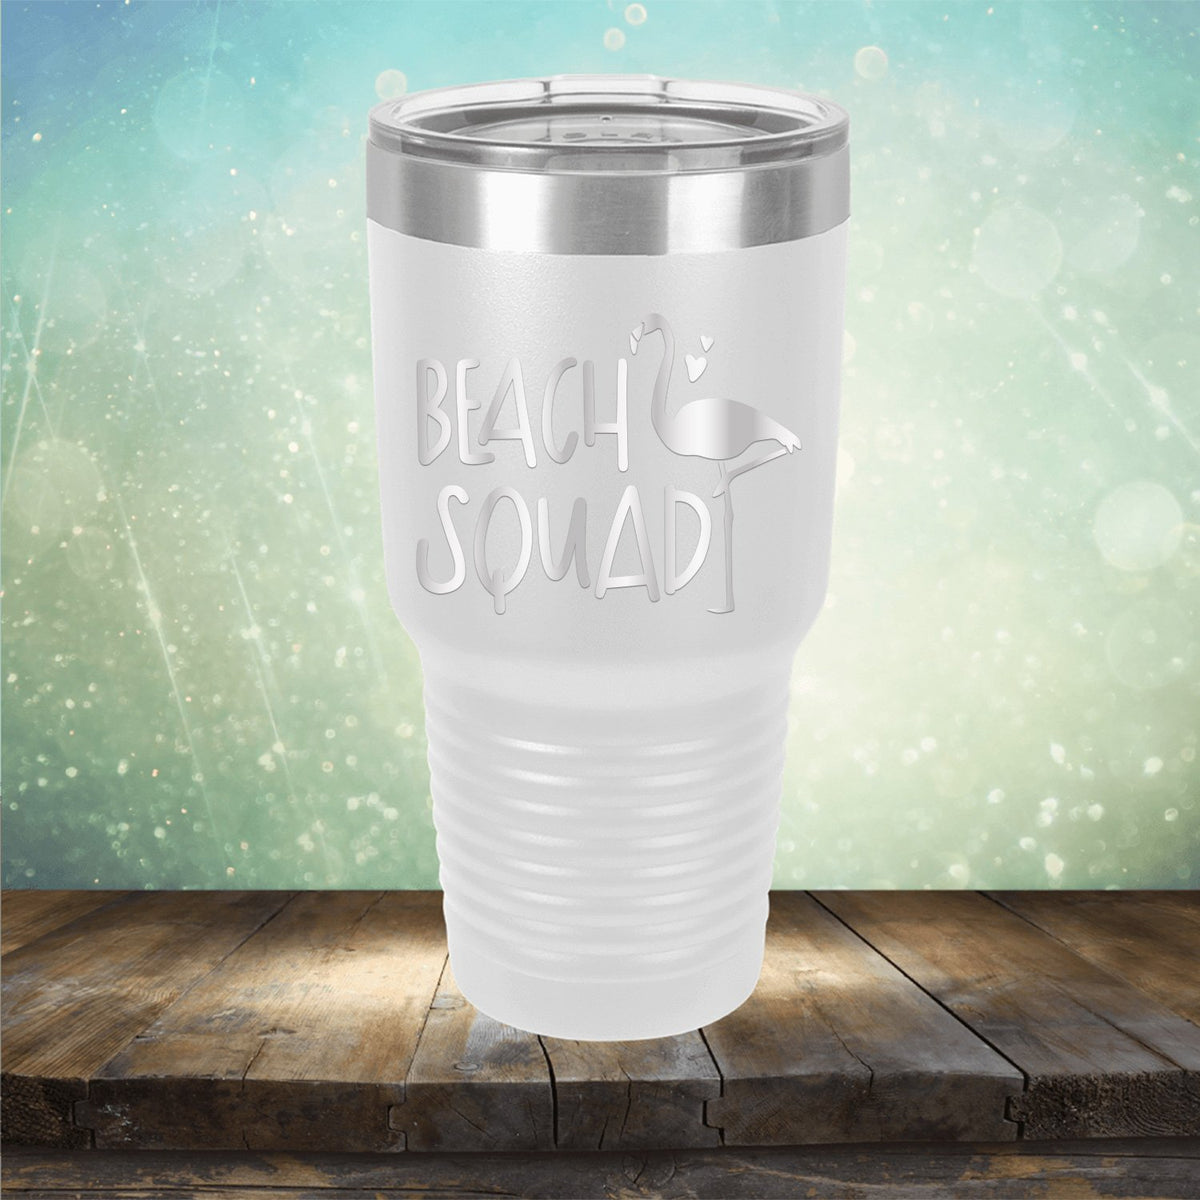 Beach Squad with Swan - Laser Etched Tumbler Mug